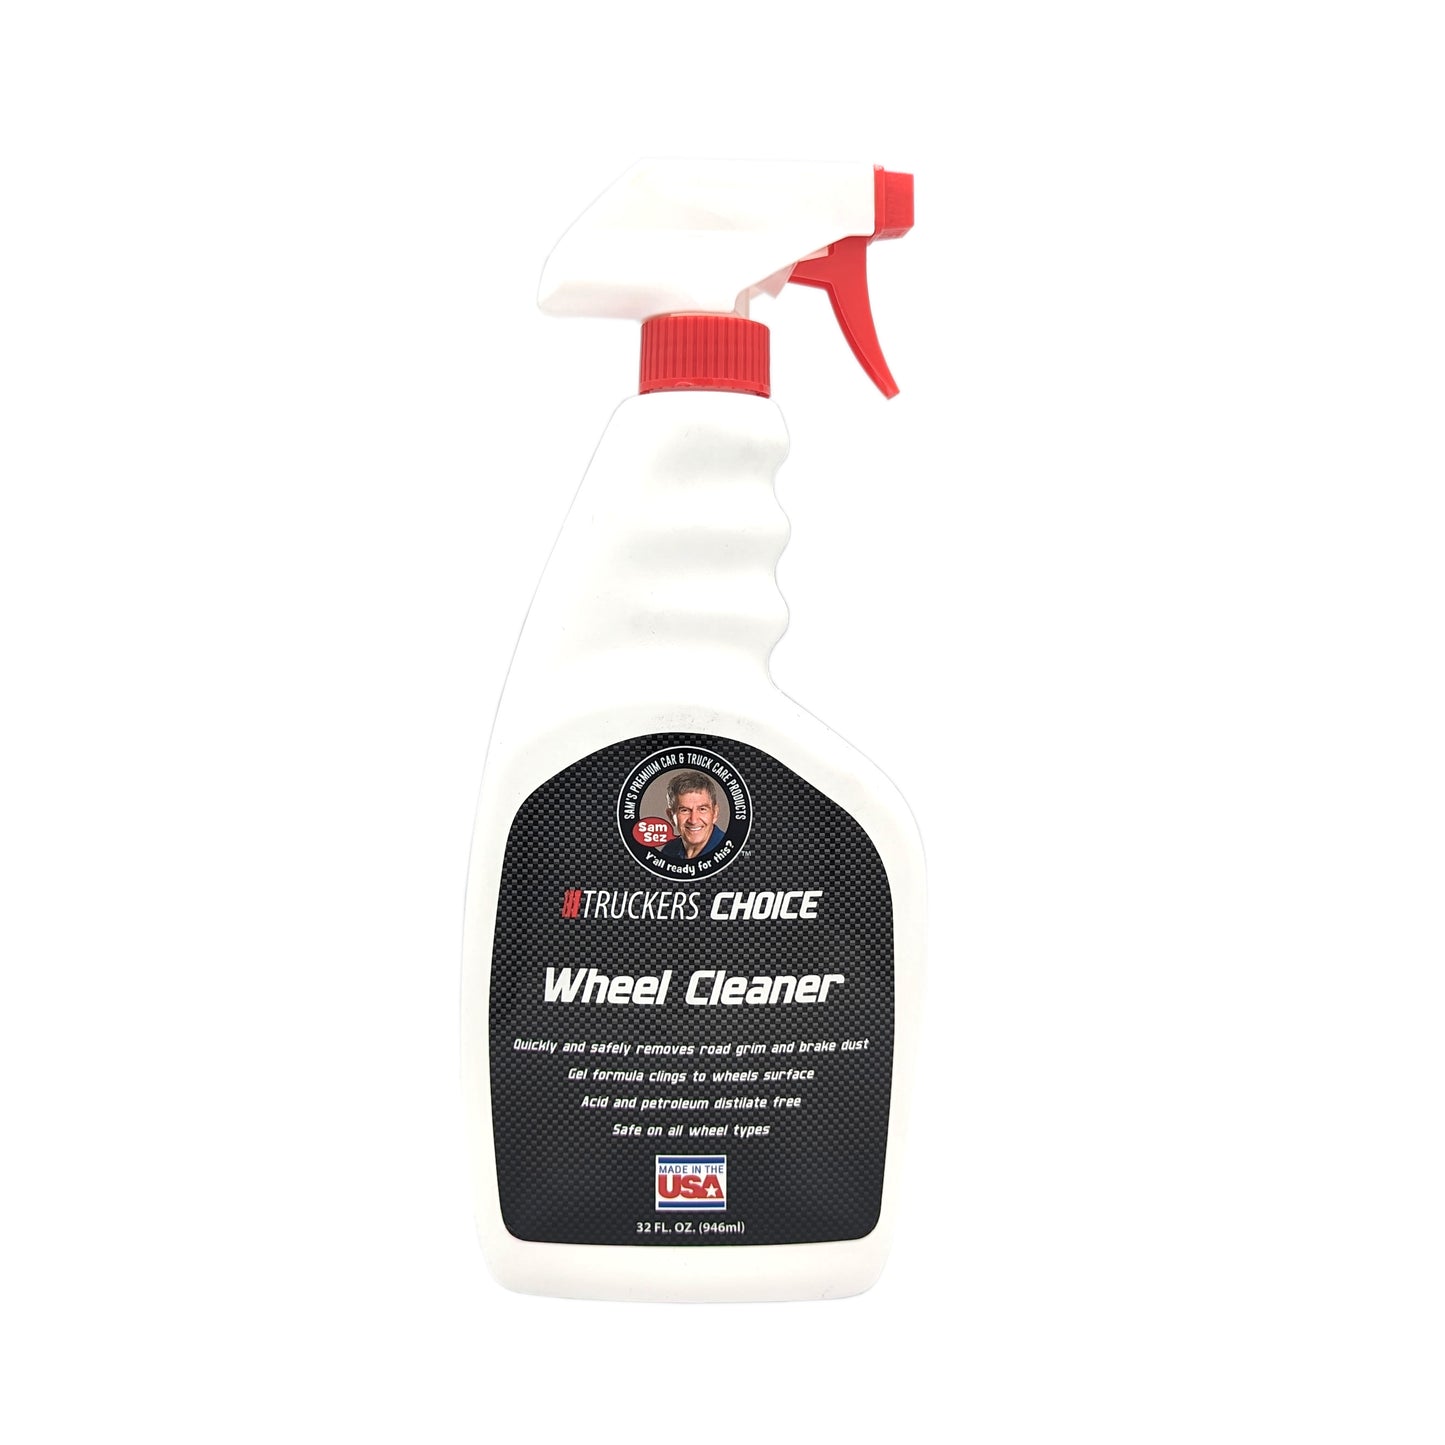 Truckers Choice Wheel Cleaner